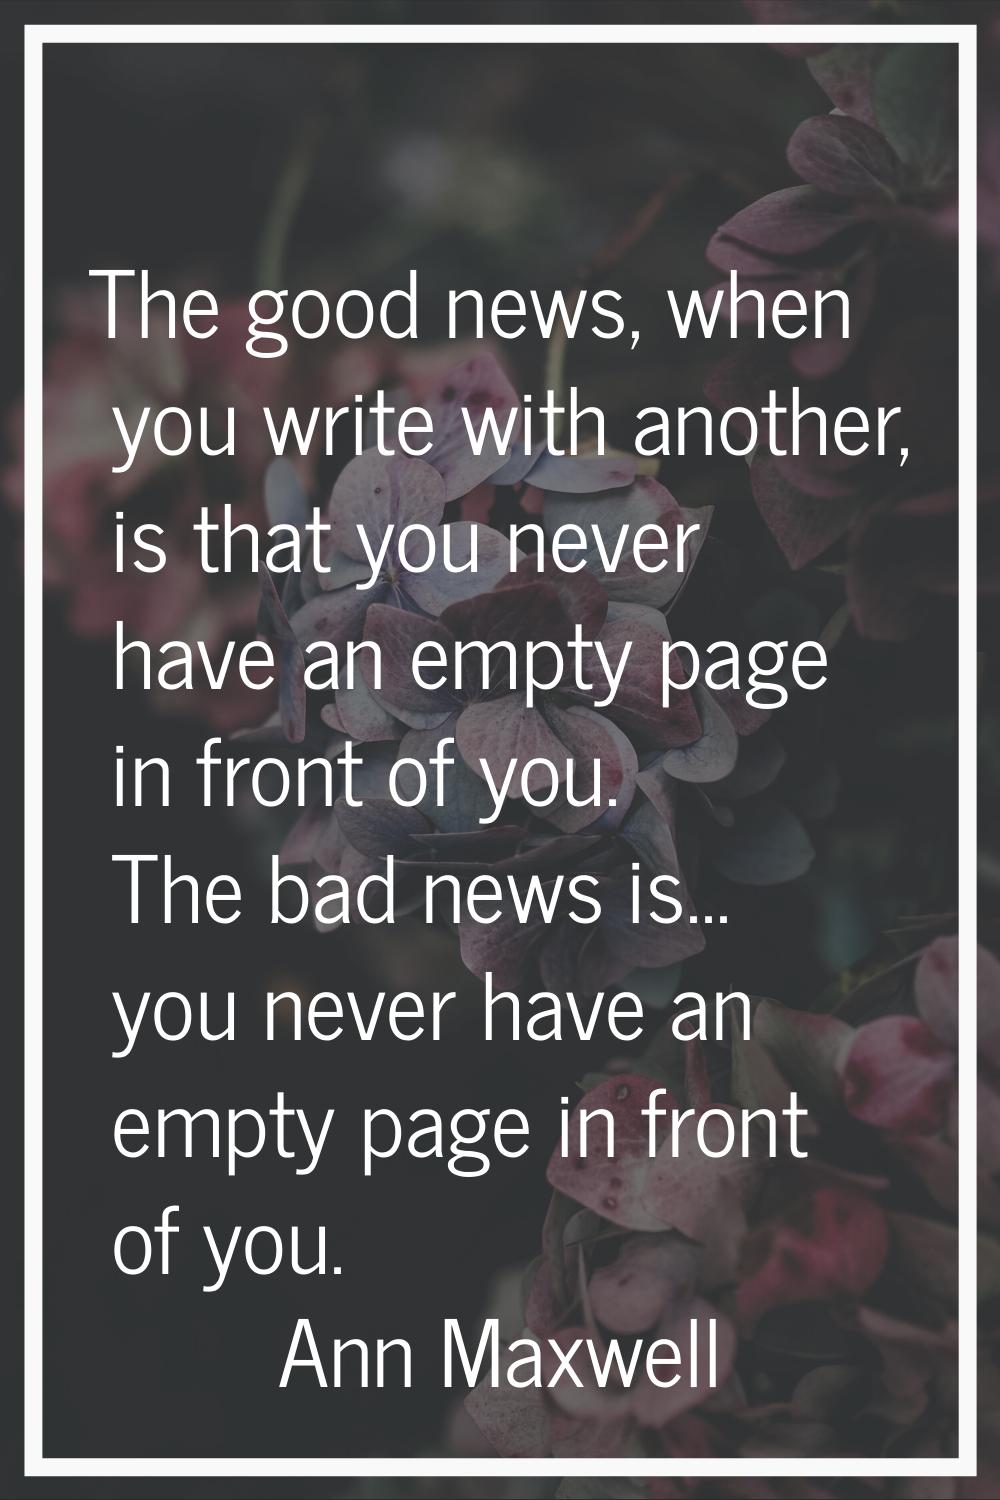 The good news, when you write with another, is that you never have an empty page in front of you. T